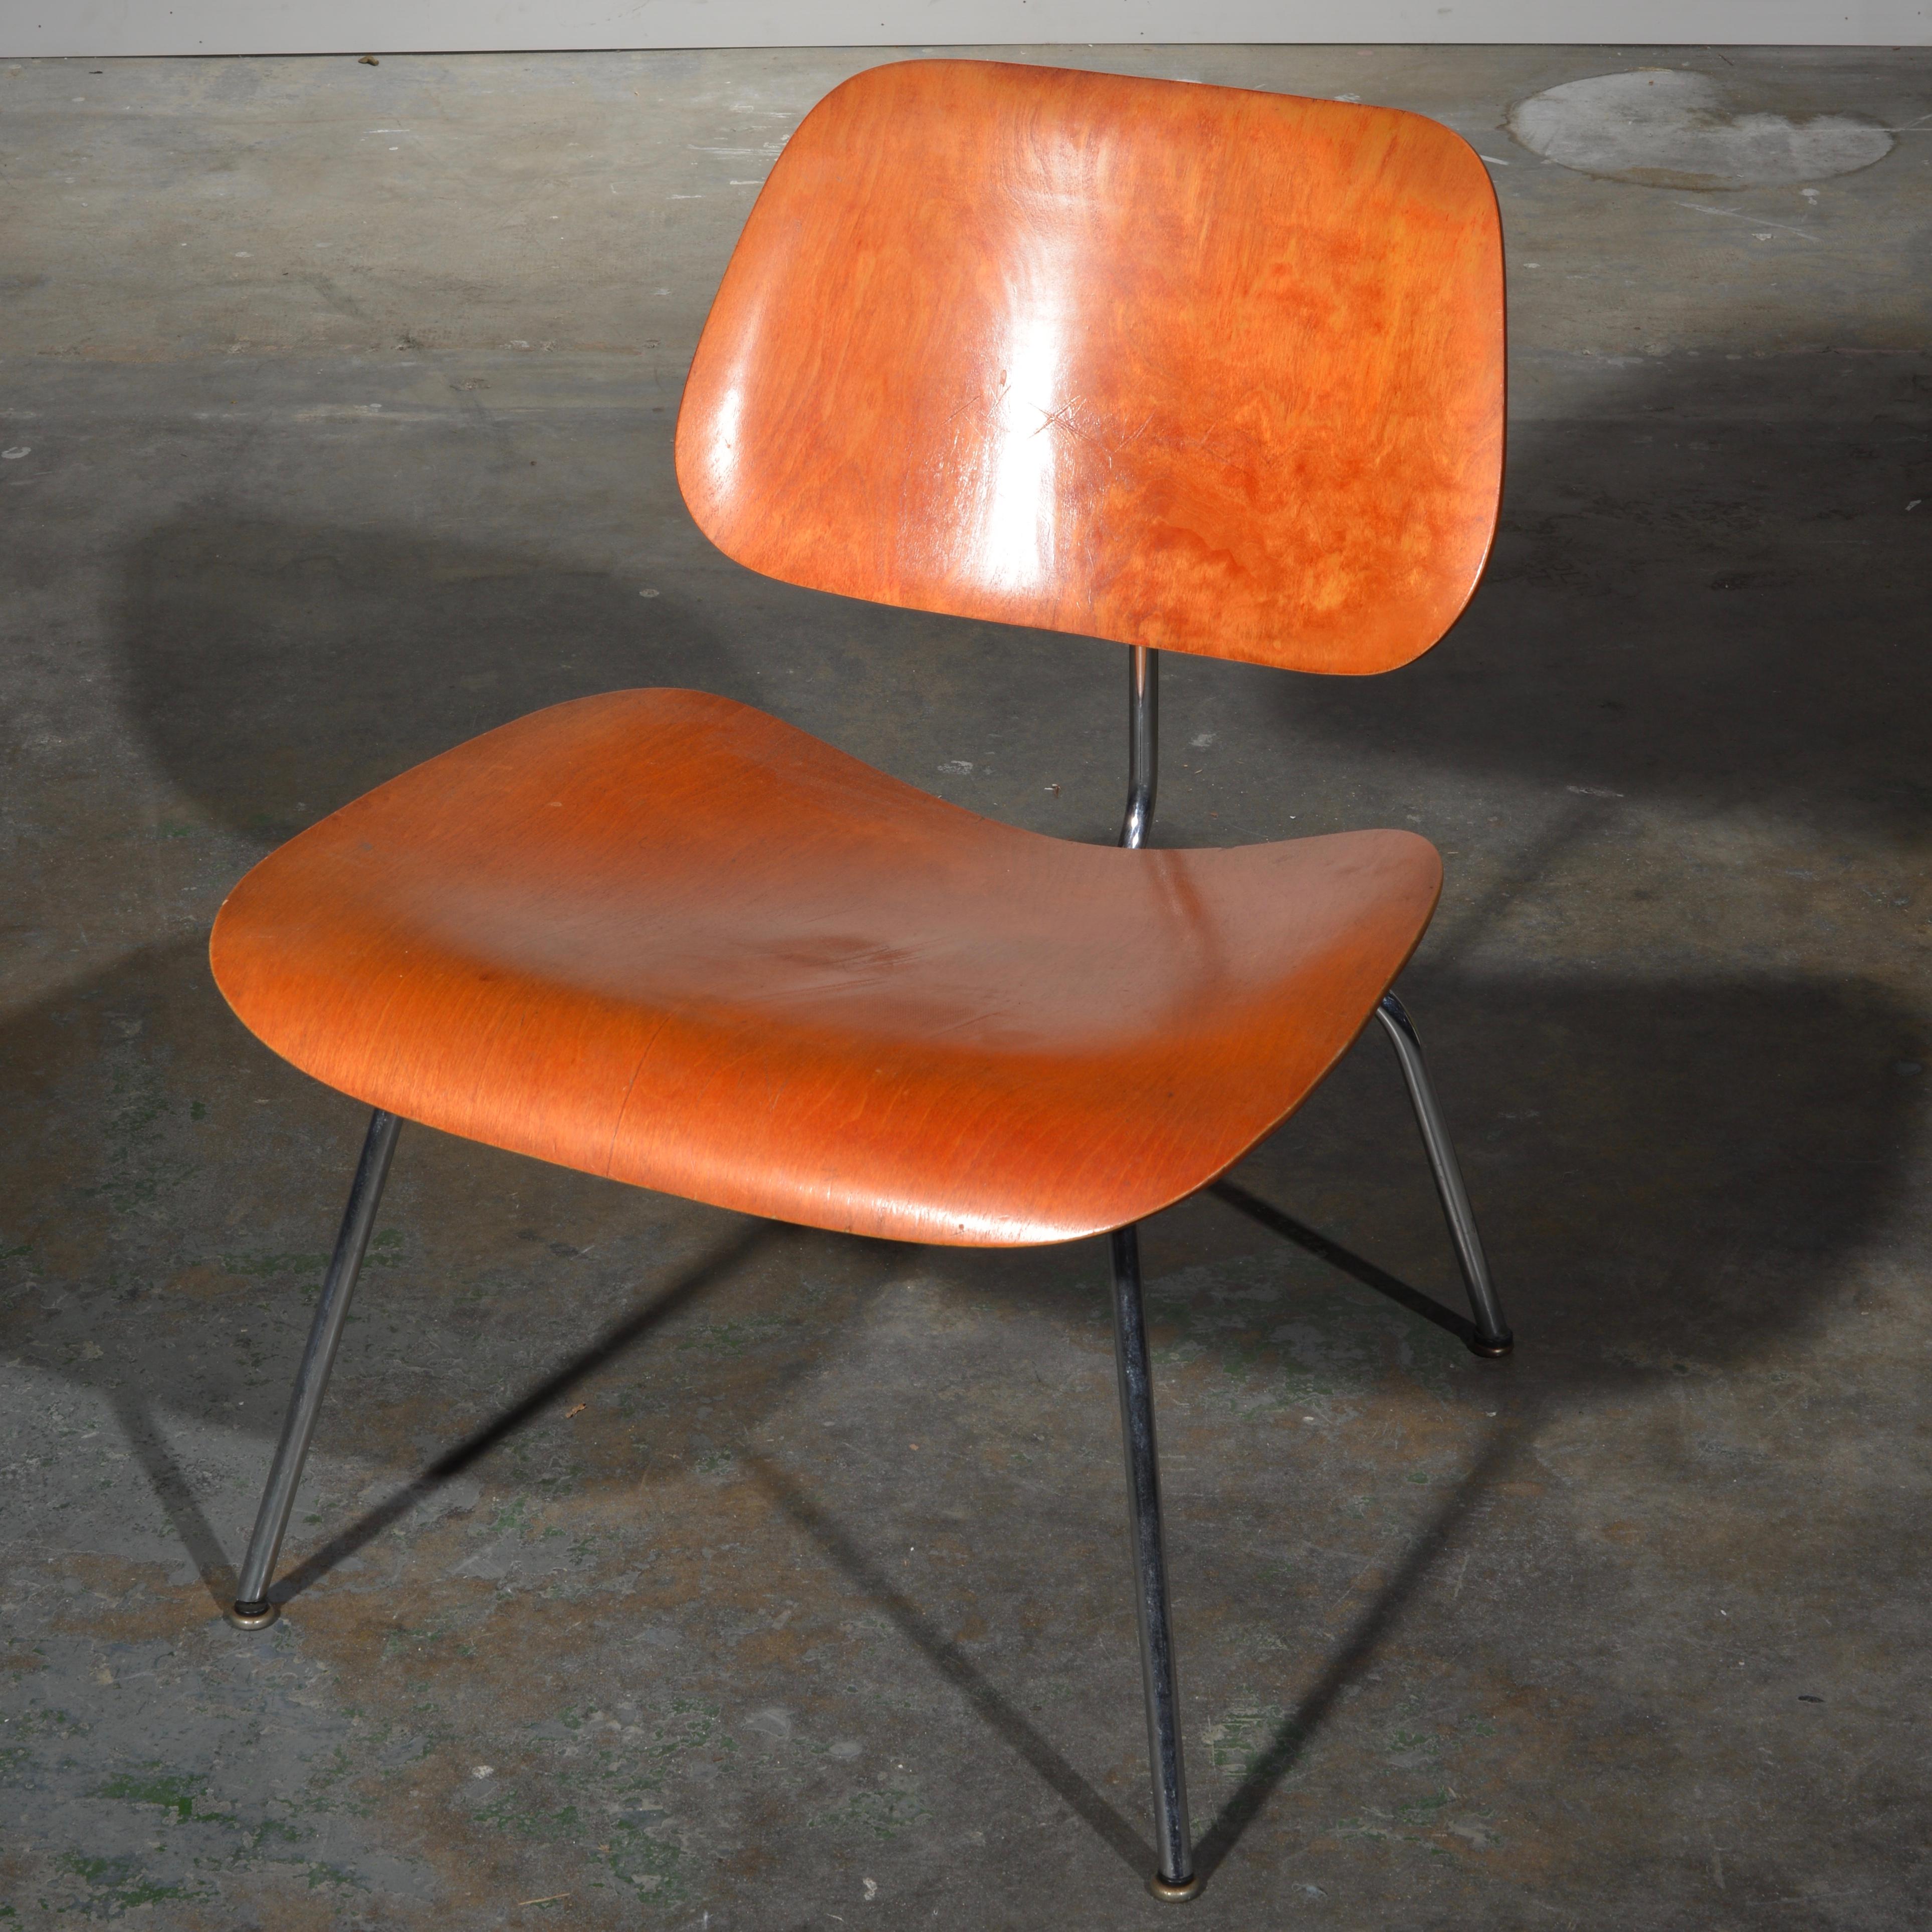 First Edition Evans Red Analine Lcm Chair by Charles and Ray Eames 1